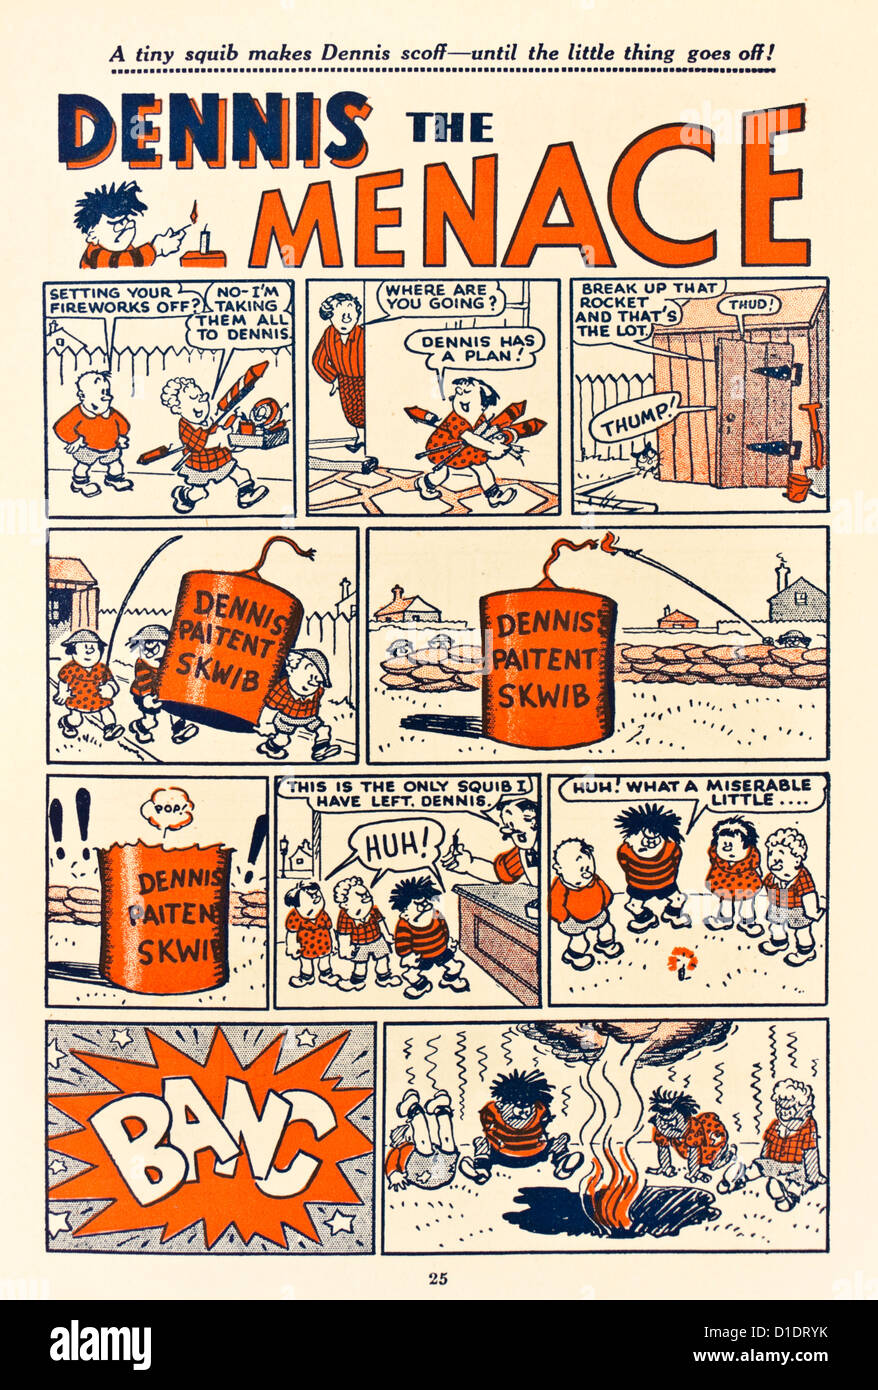 https://c8.alamy.com/comp/D1DRYK/dennis-the-menace-page-from-the-1953-beano-annual-by-dc-thomson-co-D1DRYK.jpg
